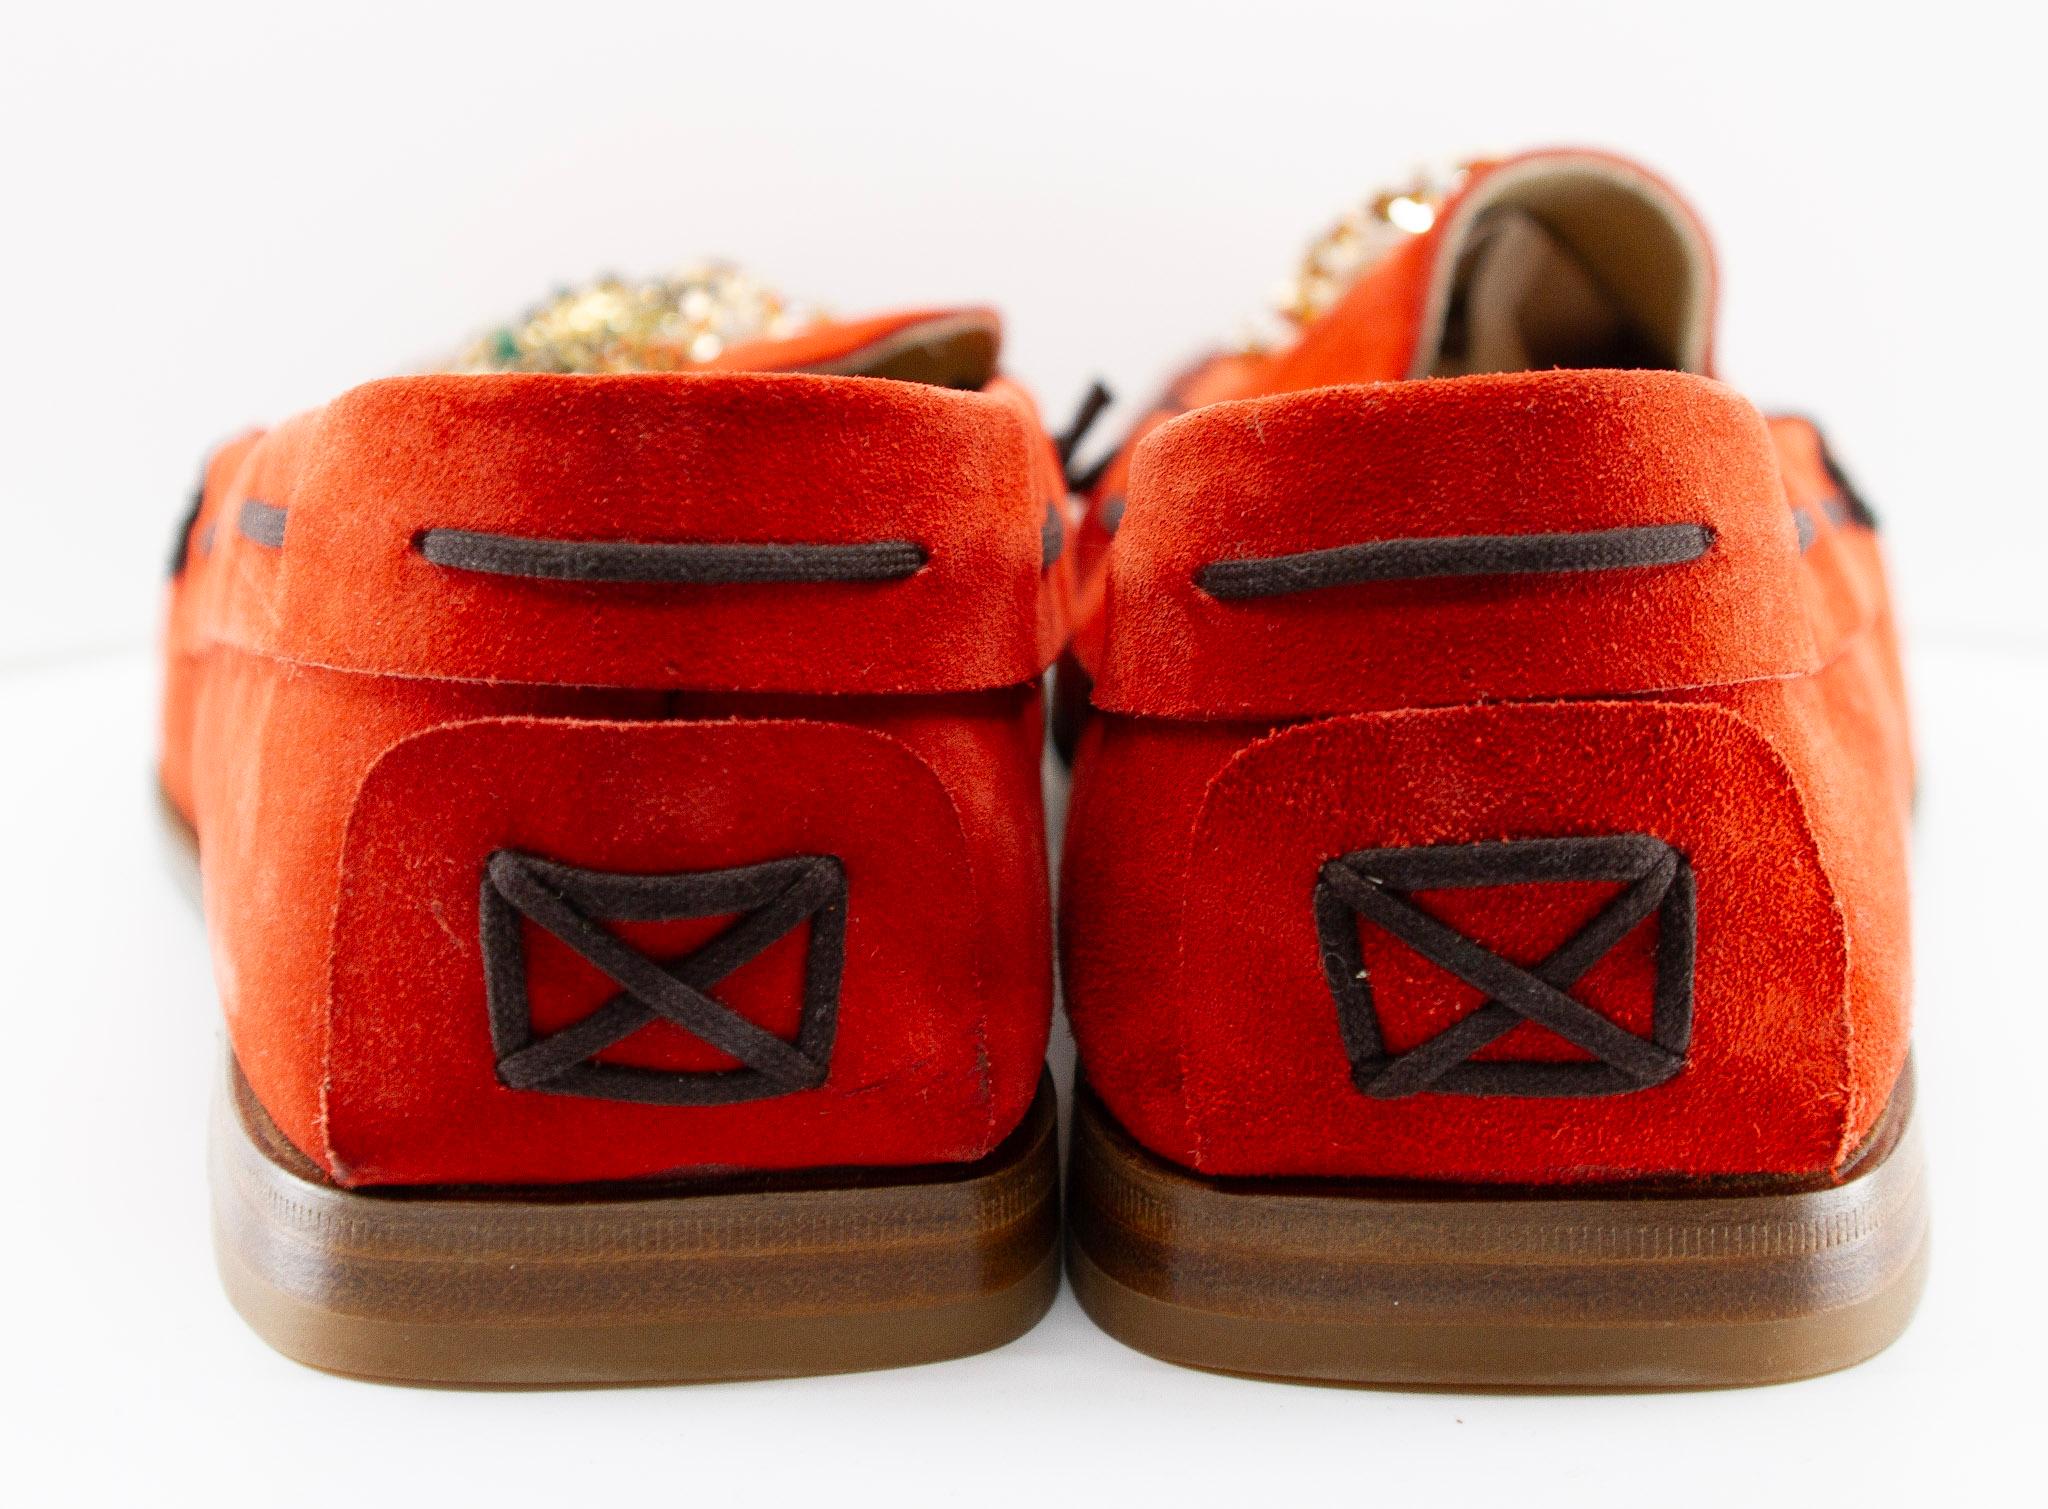 Prada Vermillion Suede Loafers with Beaded Detail and Leather Soles  In Excellent Condition For Sale In Kingston, NY